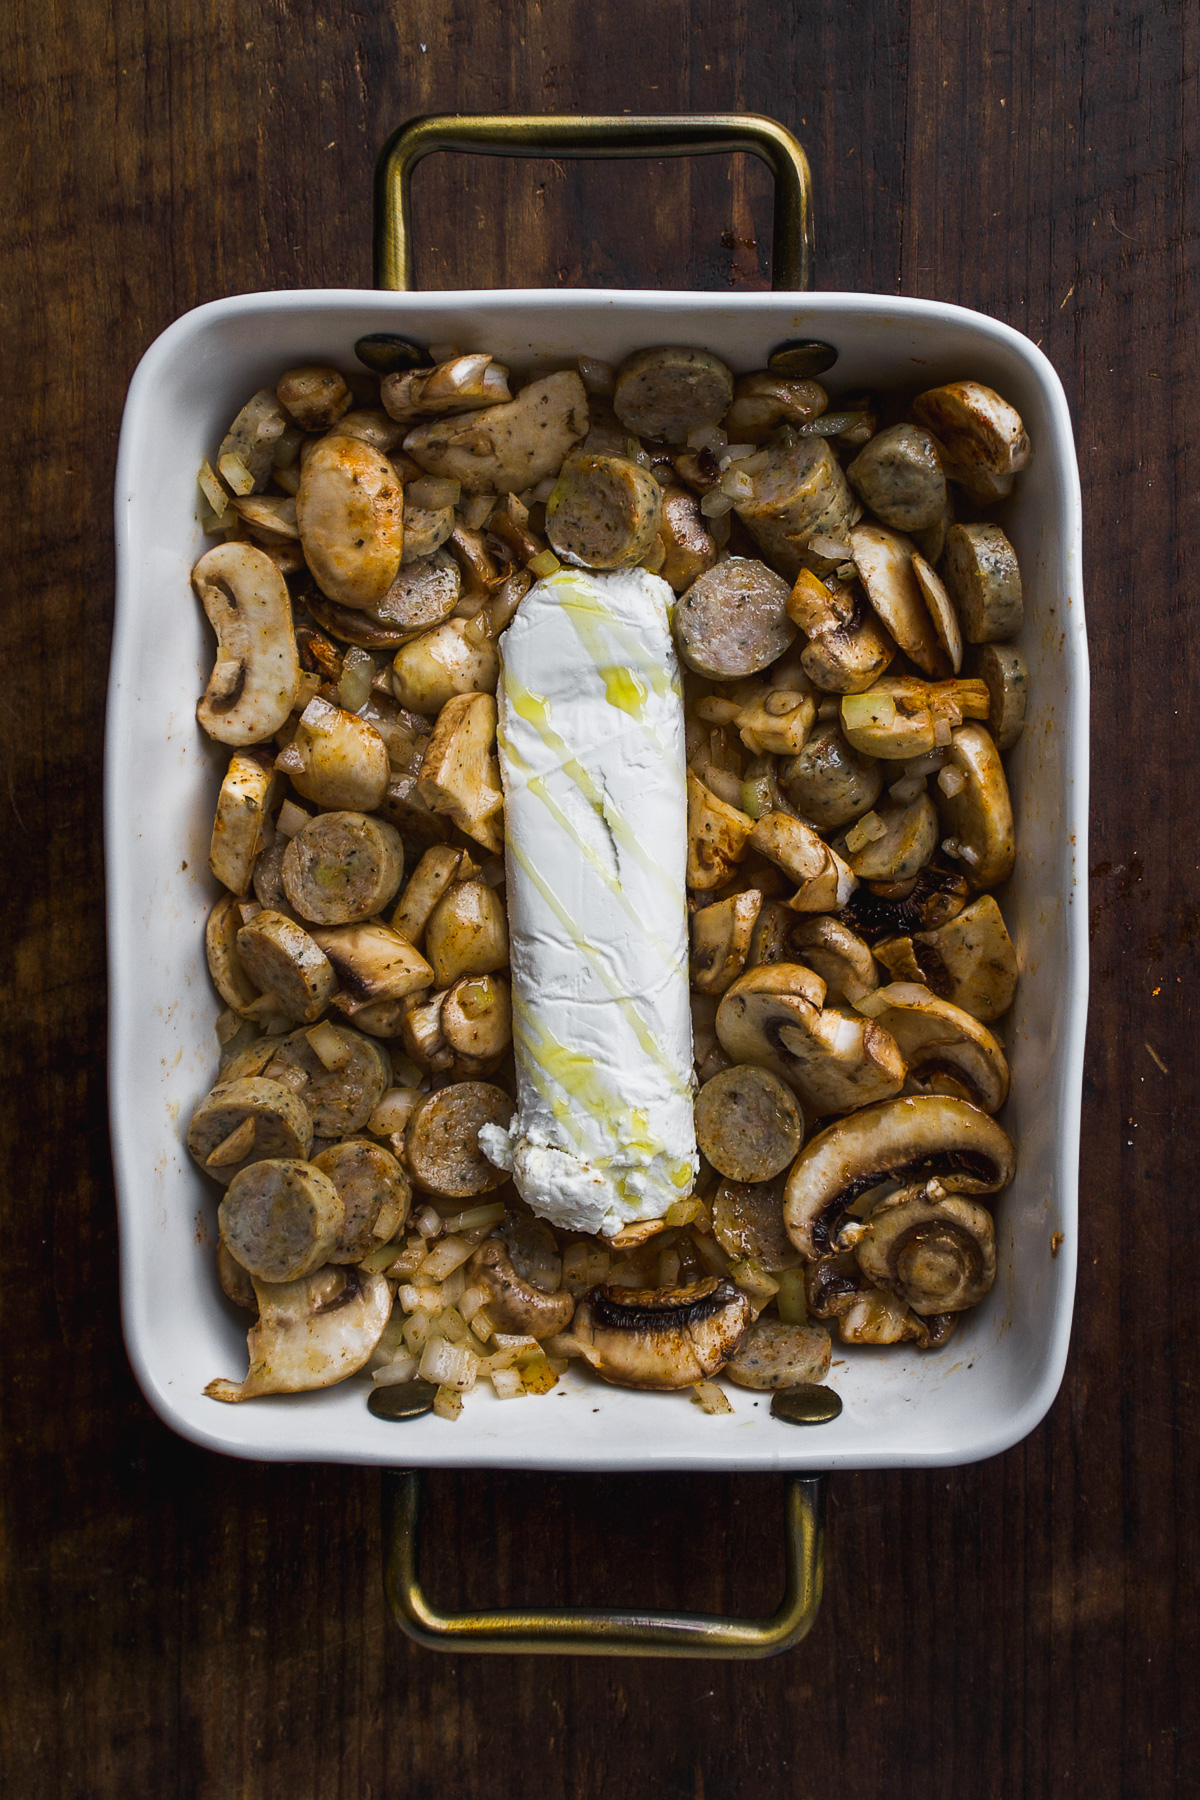 Goat cheese log in a baking dish with mushrooms and sausage.